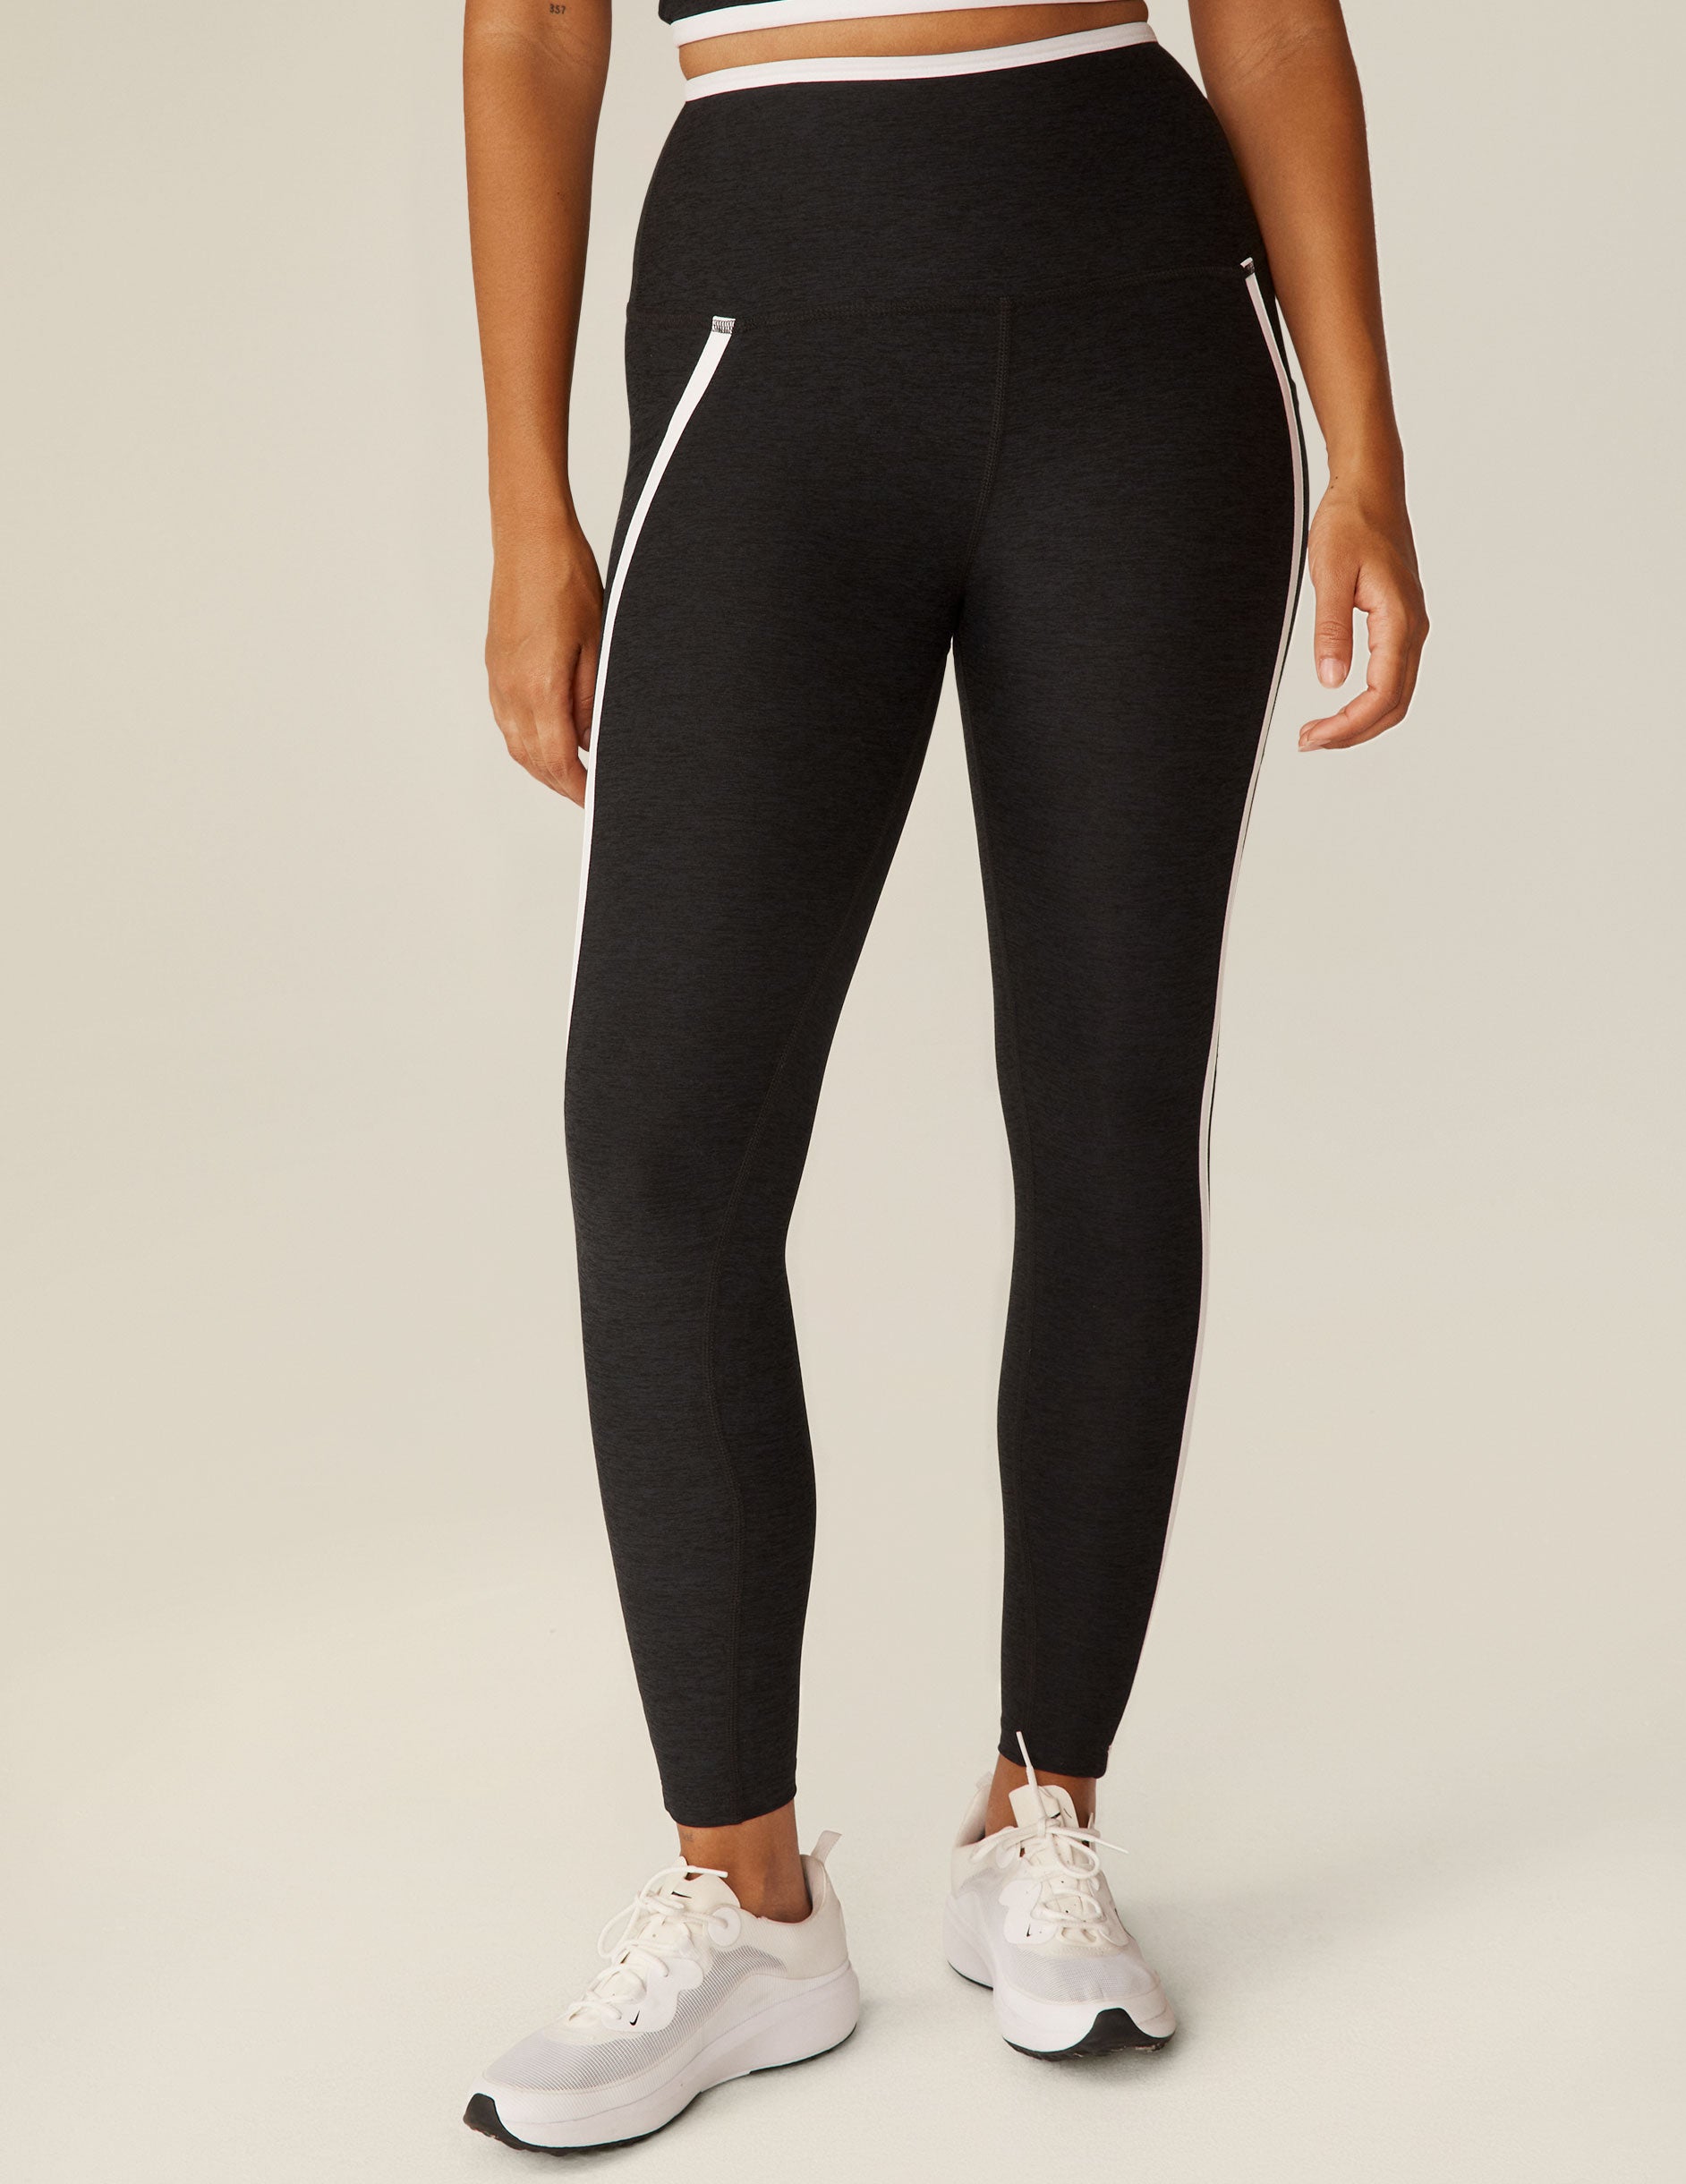 black pocket high-waisted midi legging with white lining around waistband and down the sides. 